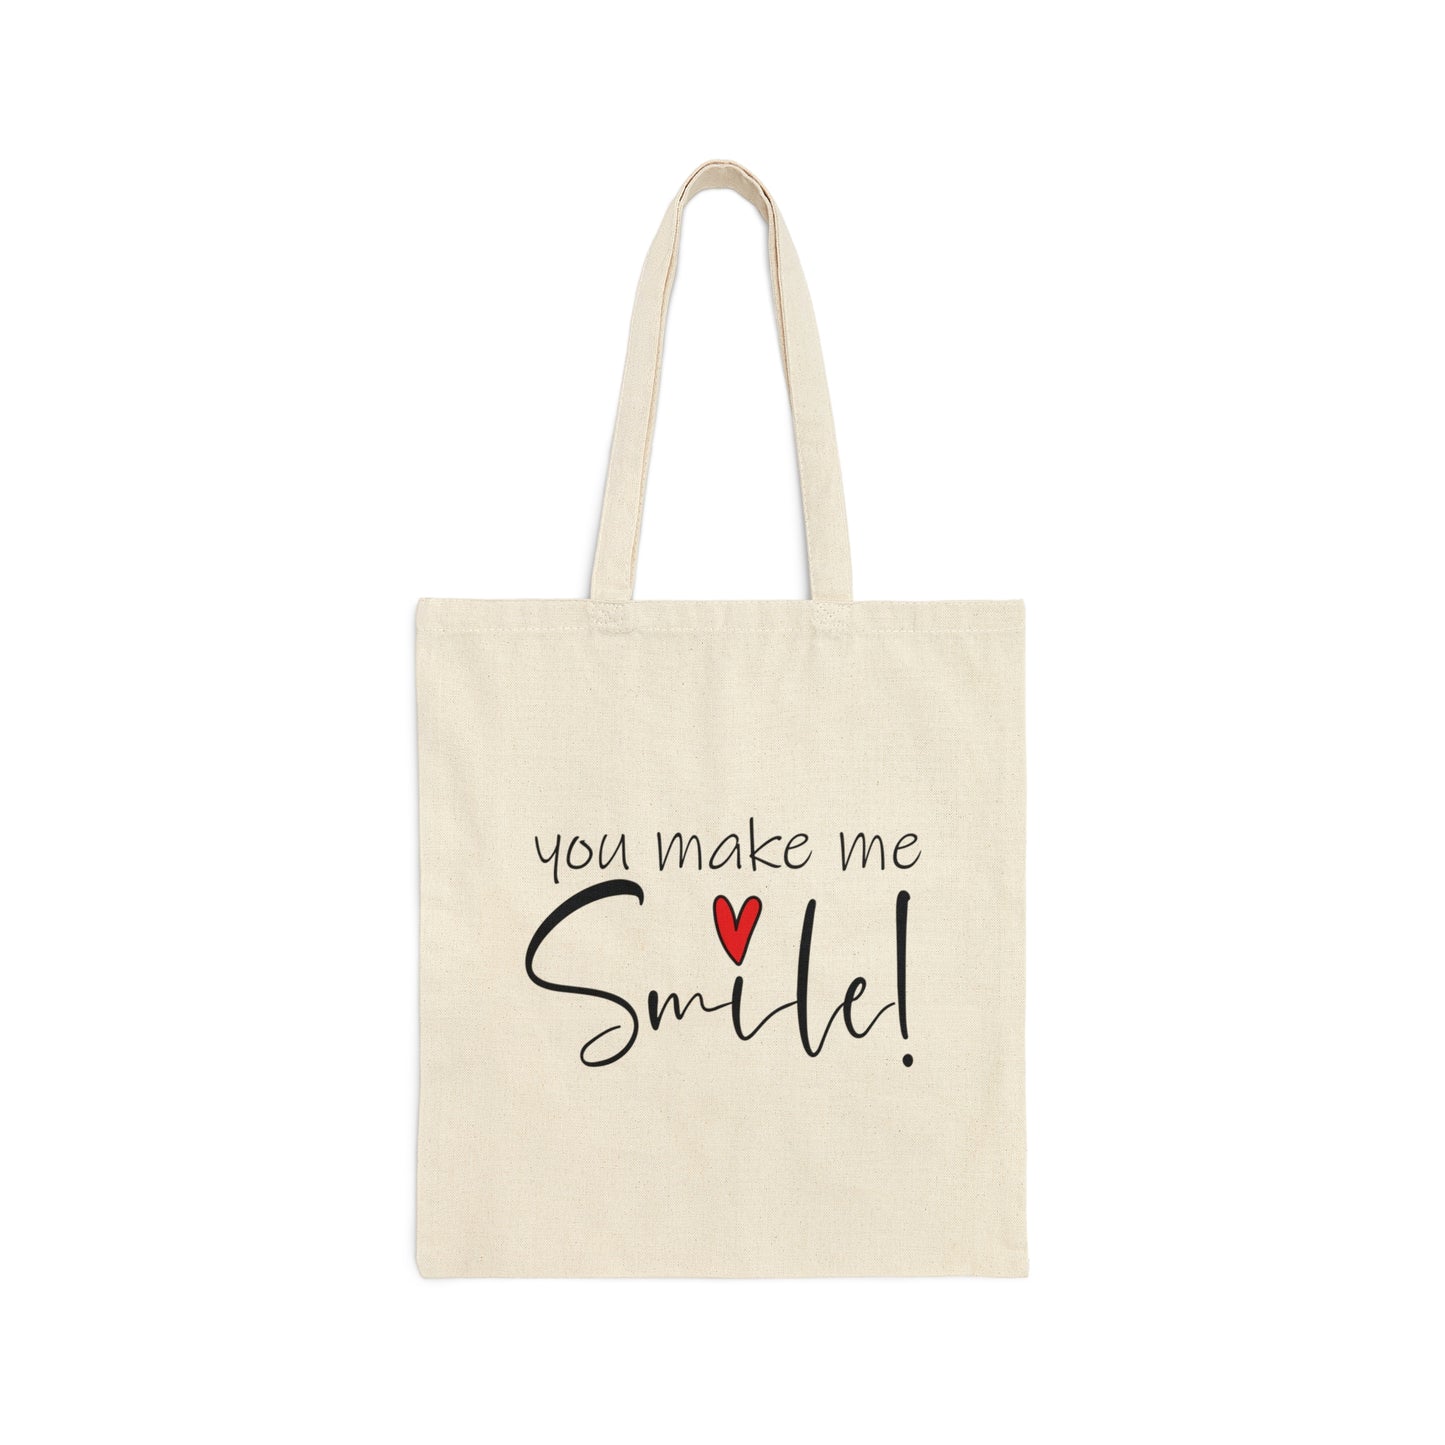 You Make me Smile Empowering Quotes Canvas Shopping Cotton Tote Bag